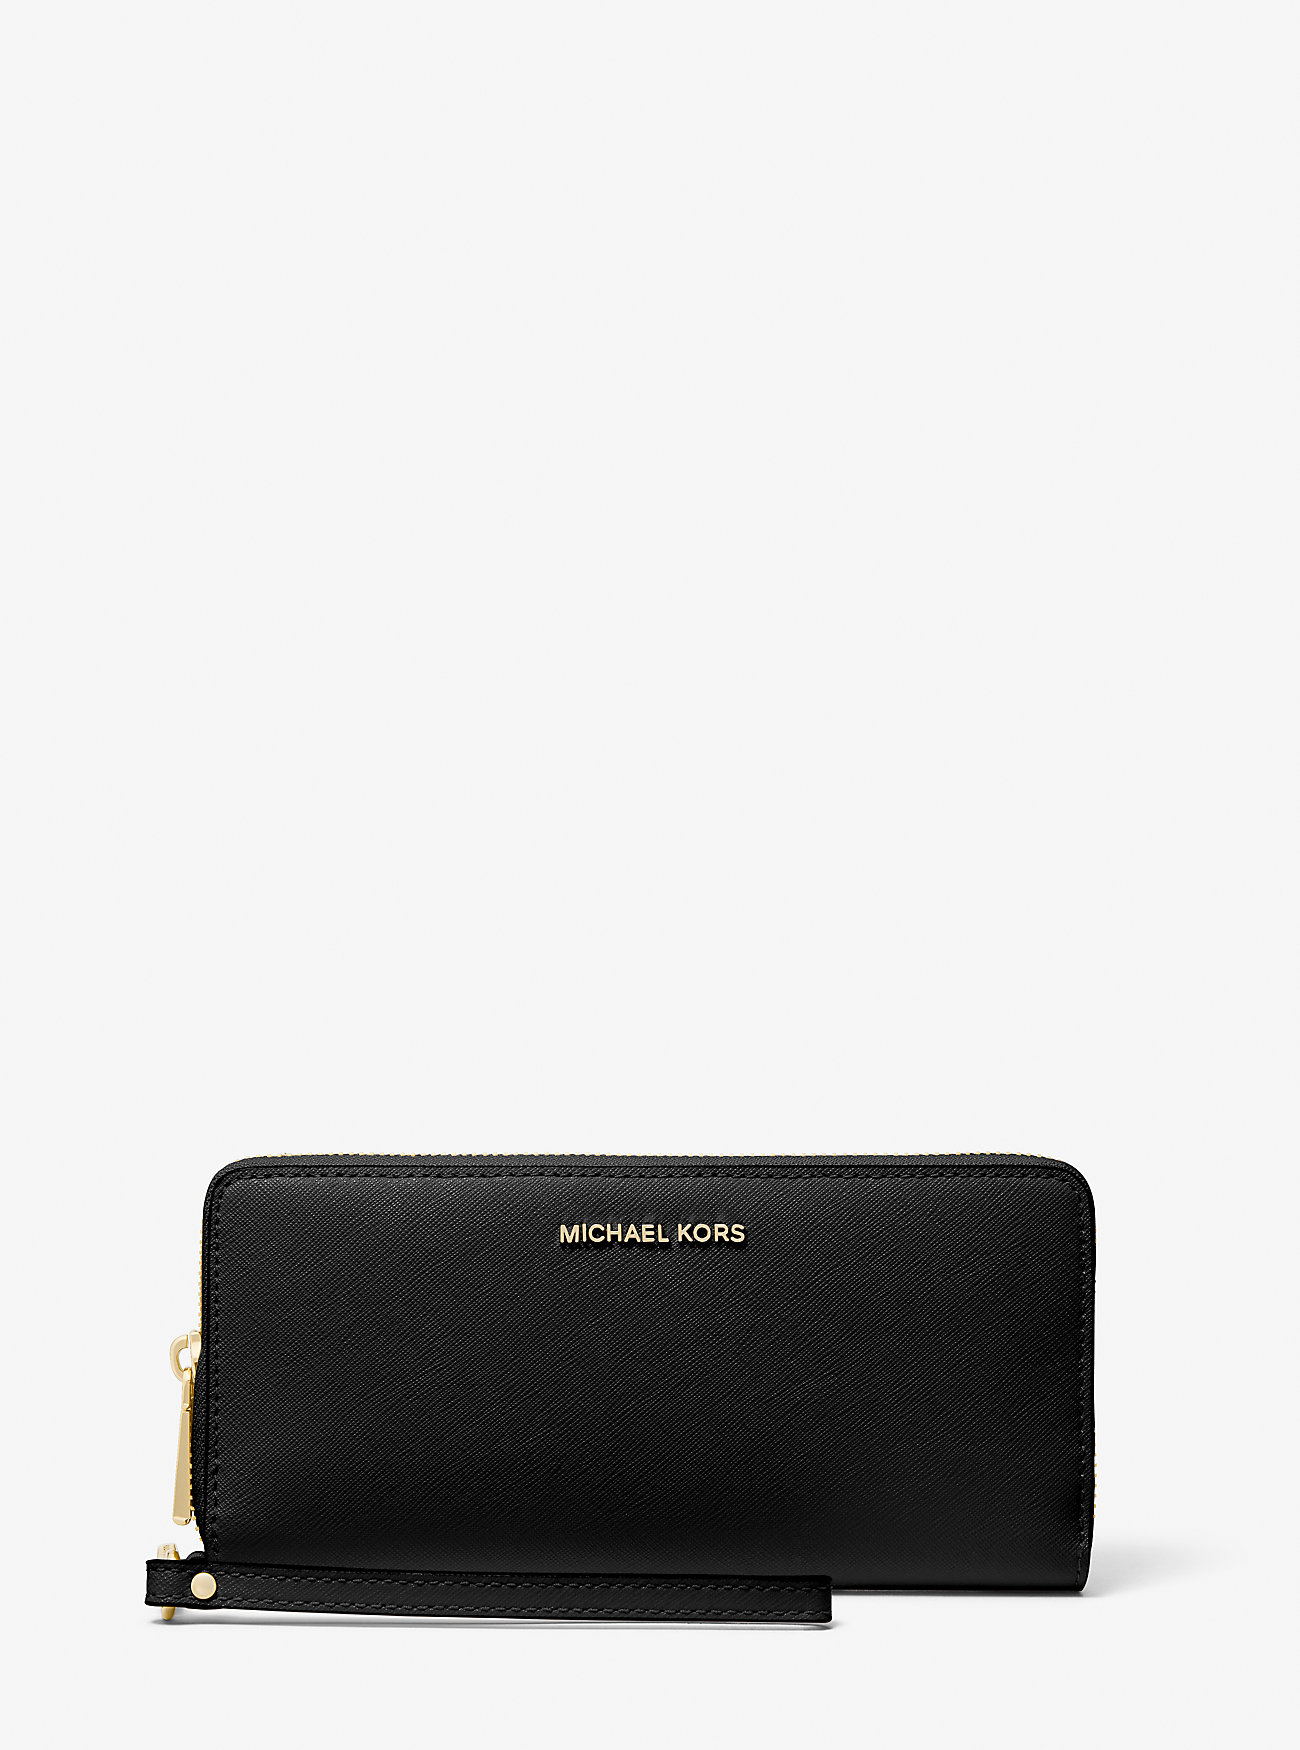 Michaelkors Large Saffiano Leather Continental Wallet